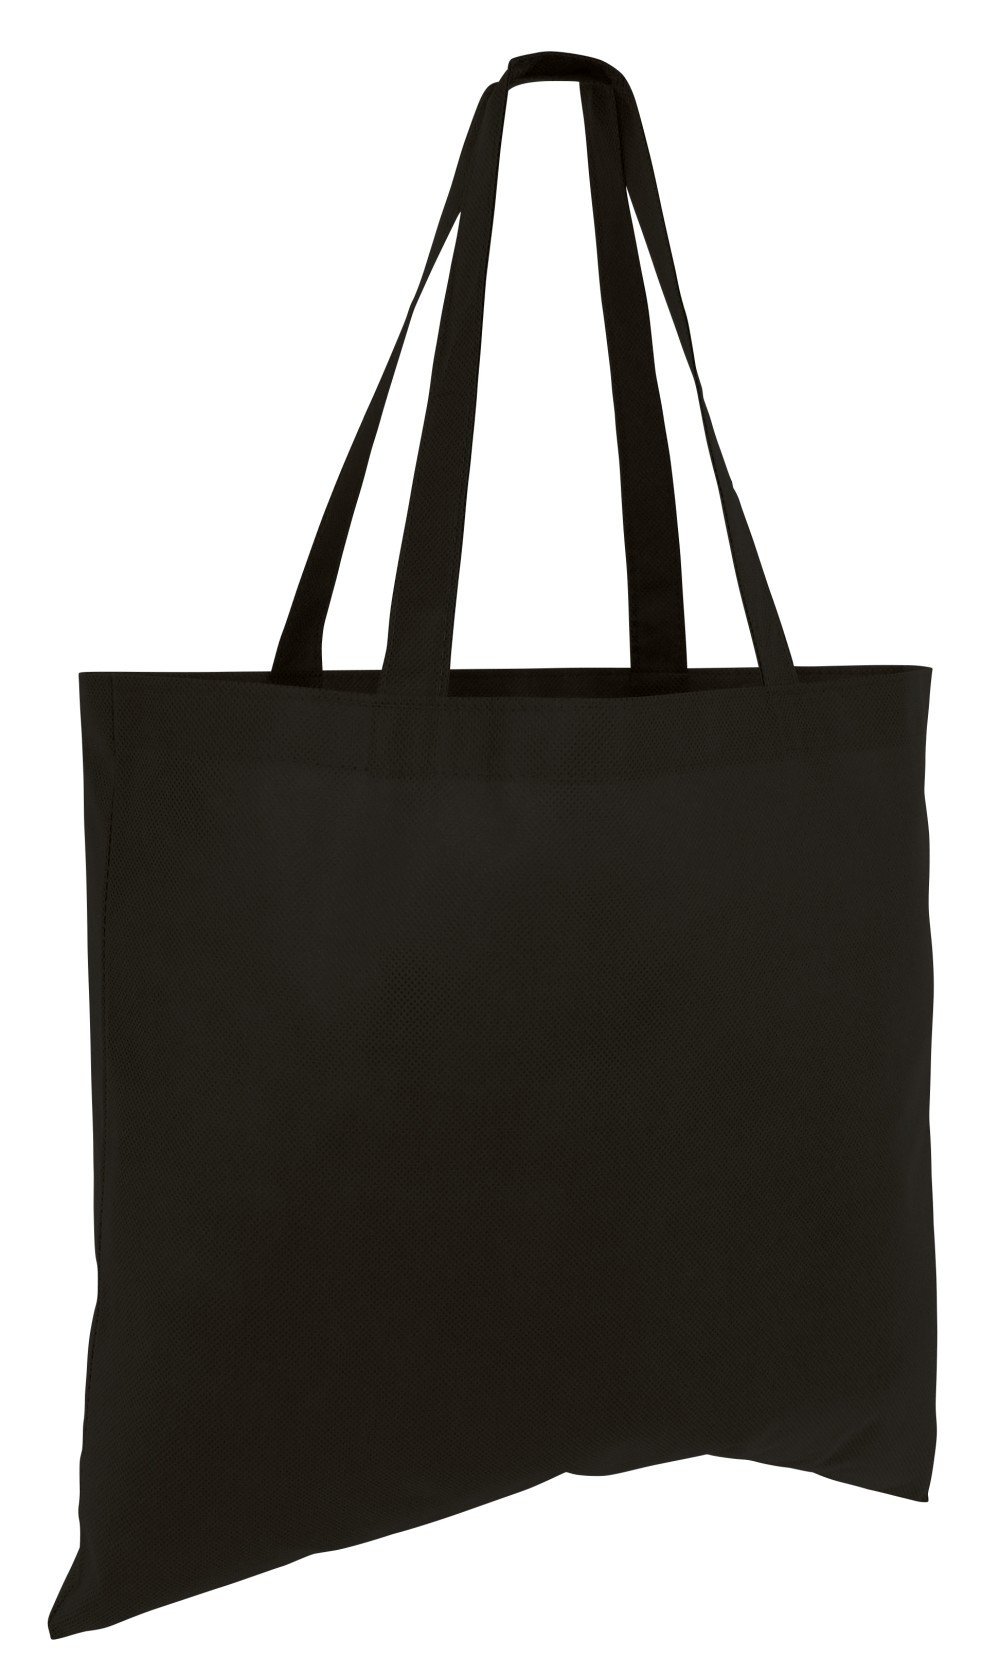 Cheap Large Promotional Tote Bags black